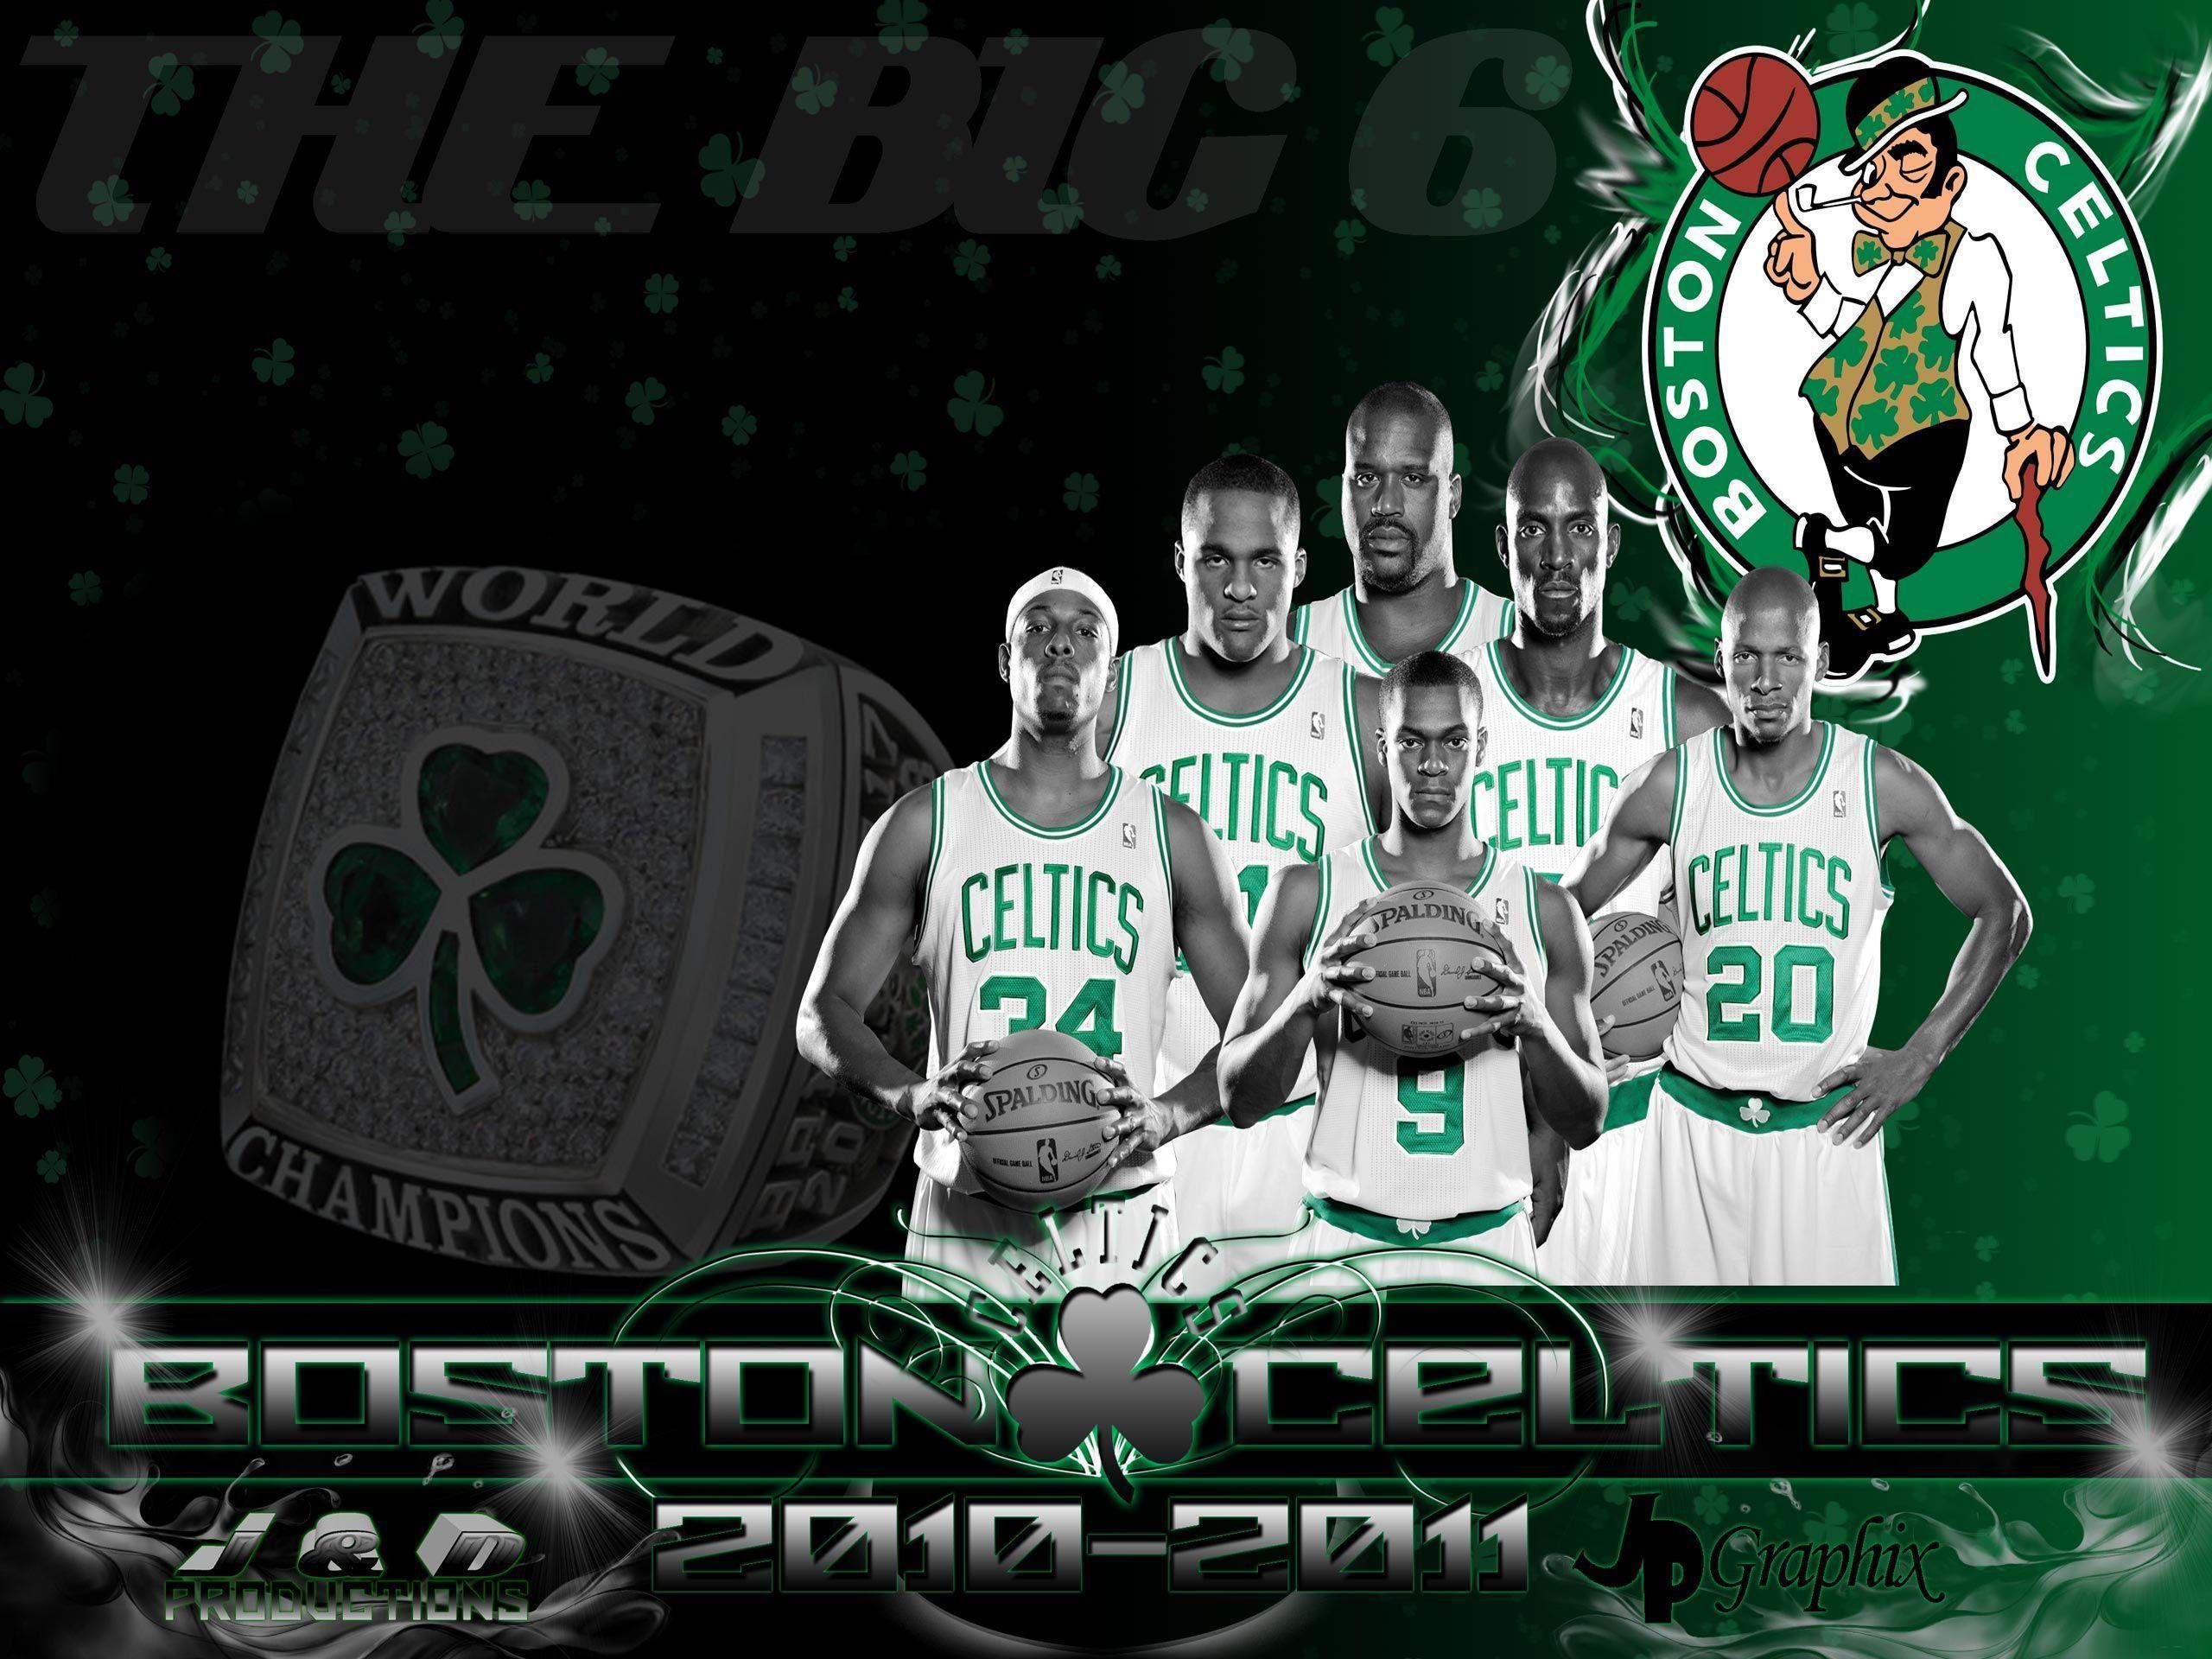 Some custom and non custom Celtics wallpapers if you like them show some  love and Ill post the rest I have a ton  rbostonceltics